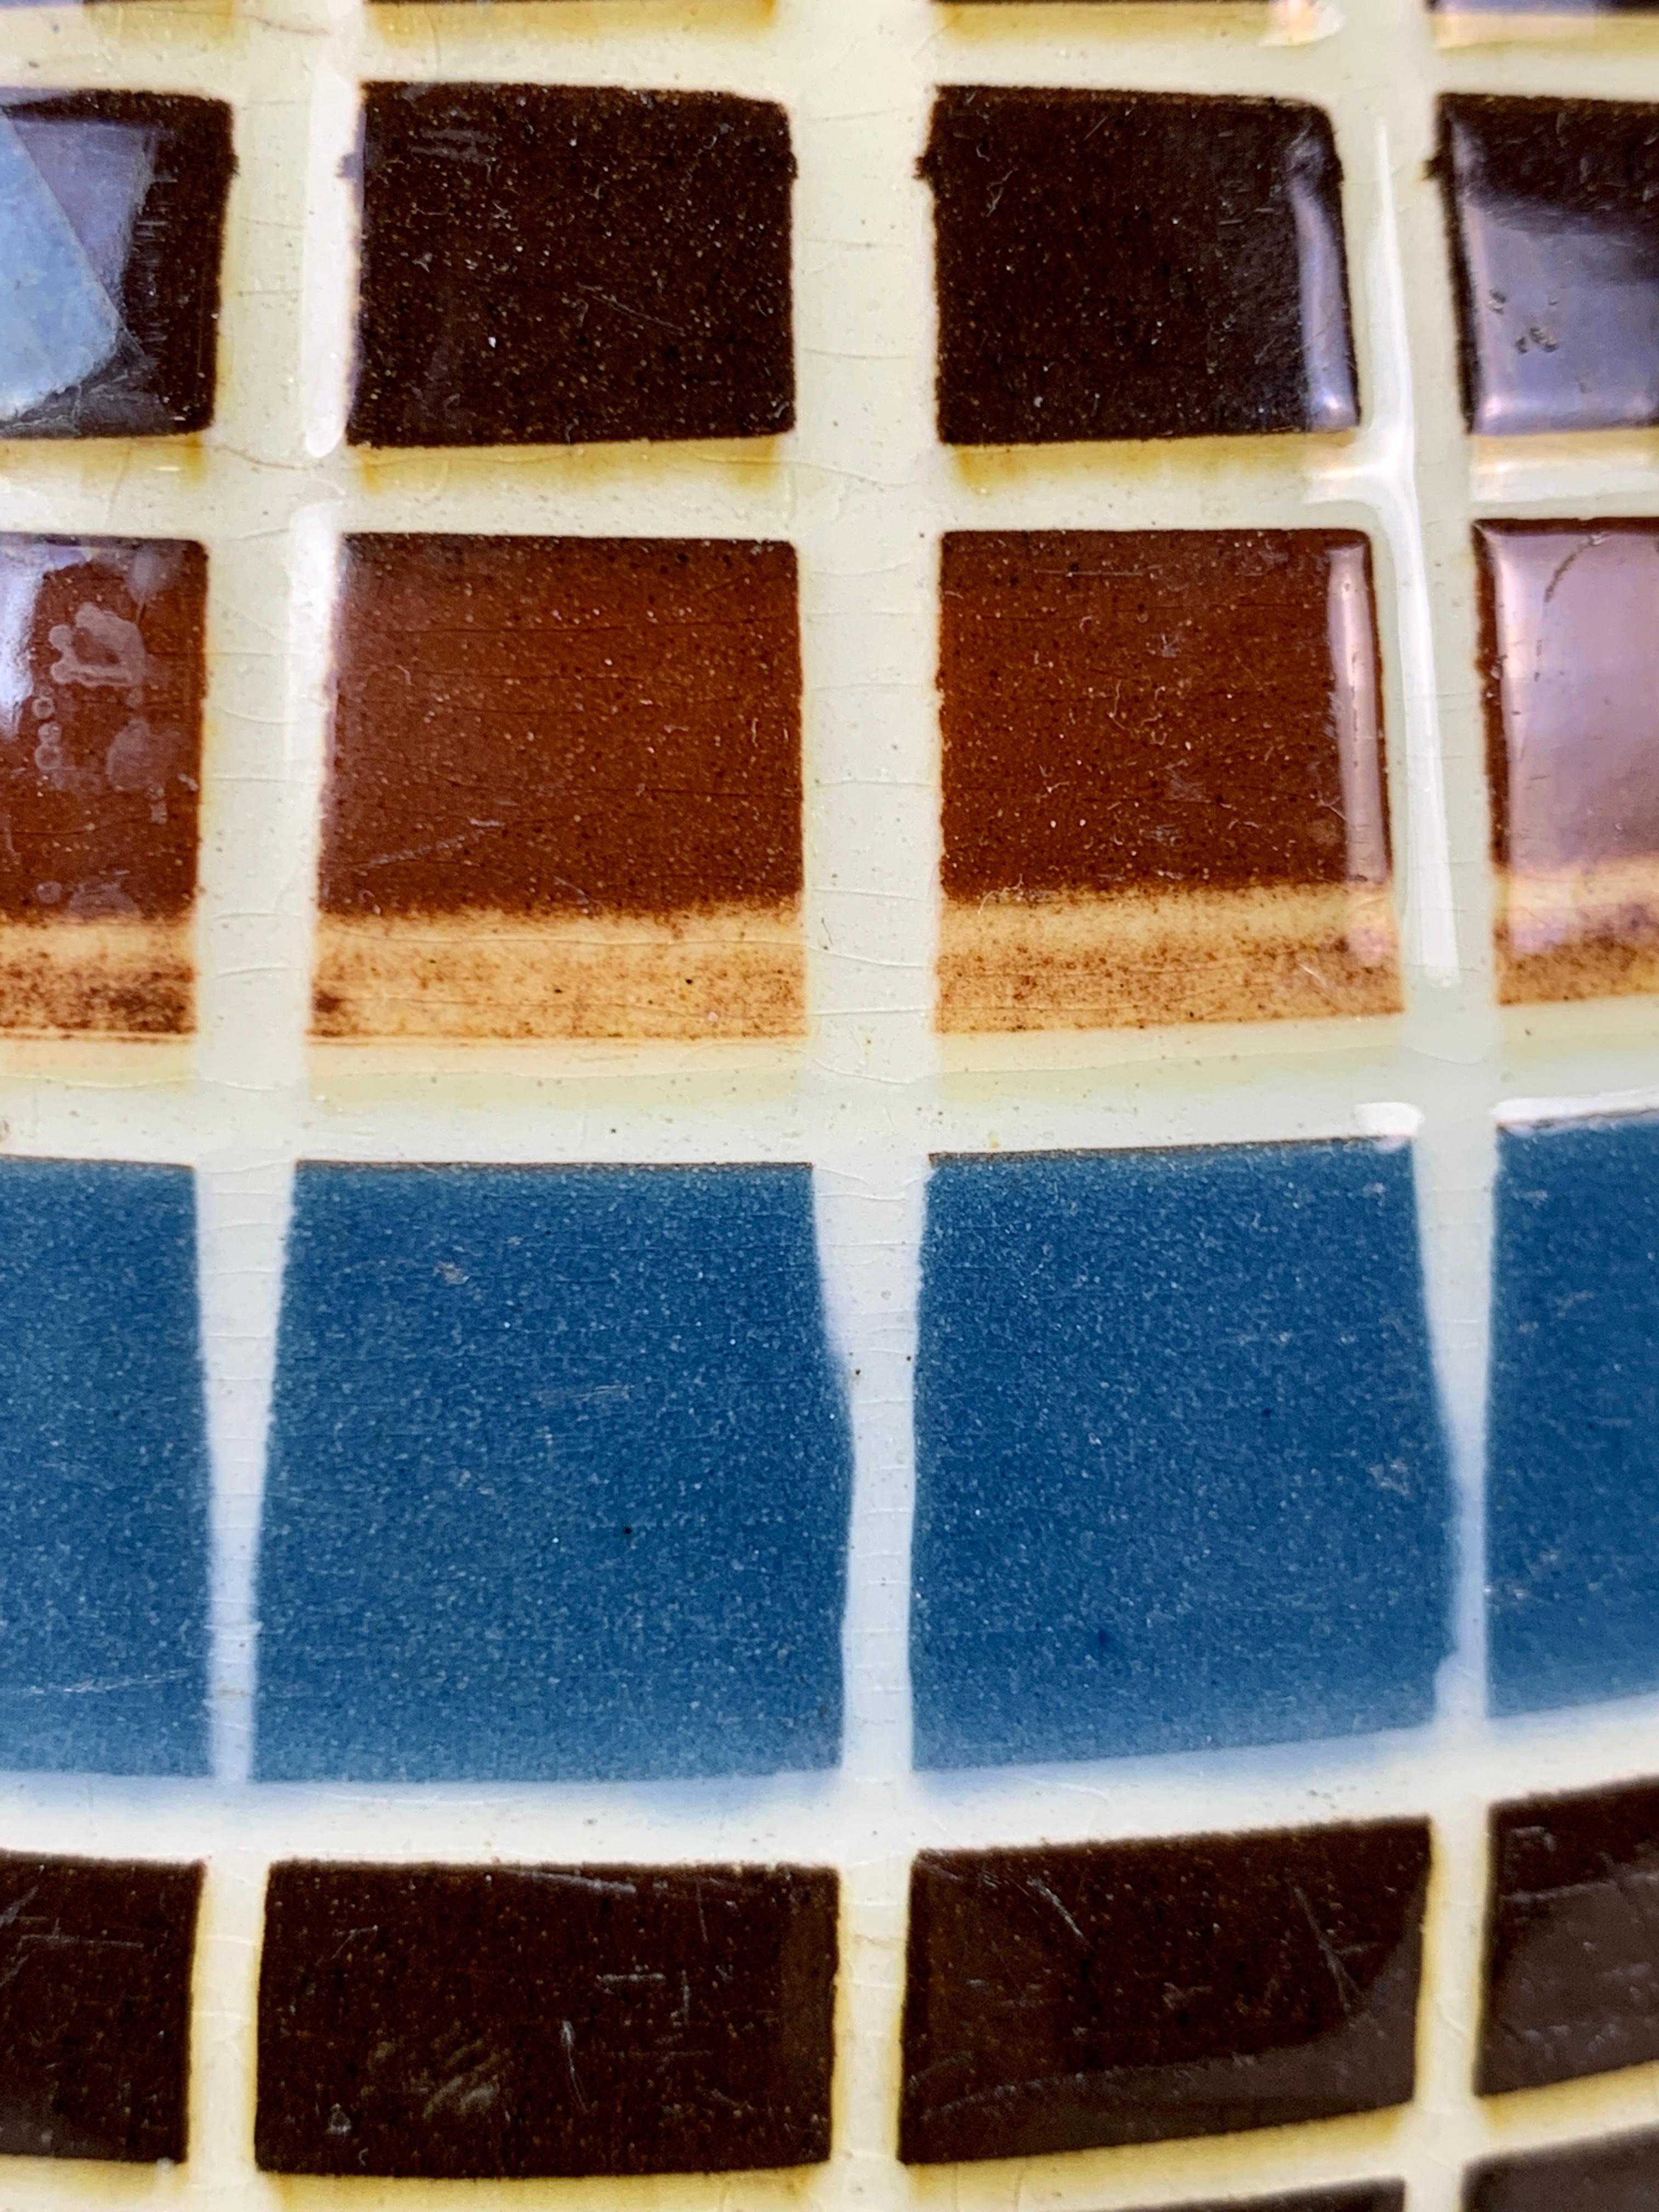 Made in England circa 1800, this large and exquisite mochaware pitcher is decorated with 16 bands of blue and brown colored slip.
Ten of these bands are cut through vertically and horizontally, forming a design of squares and rectangles.
The